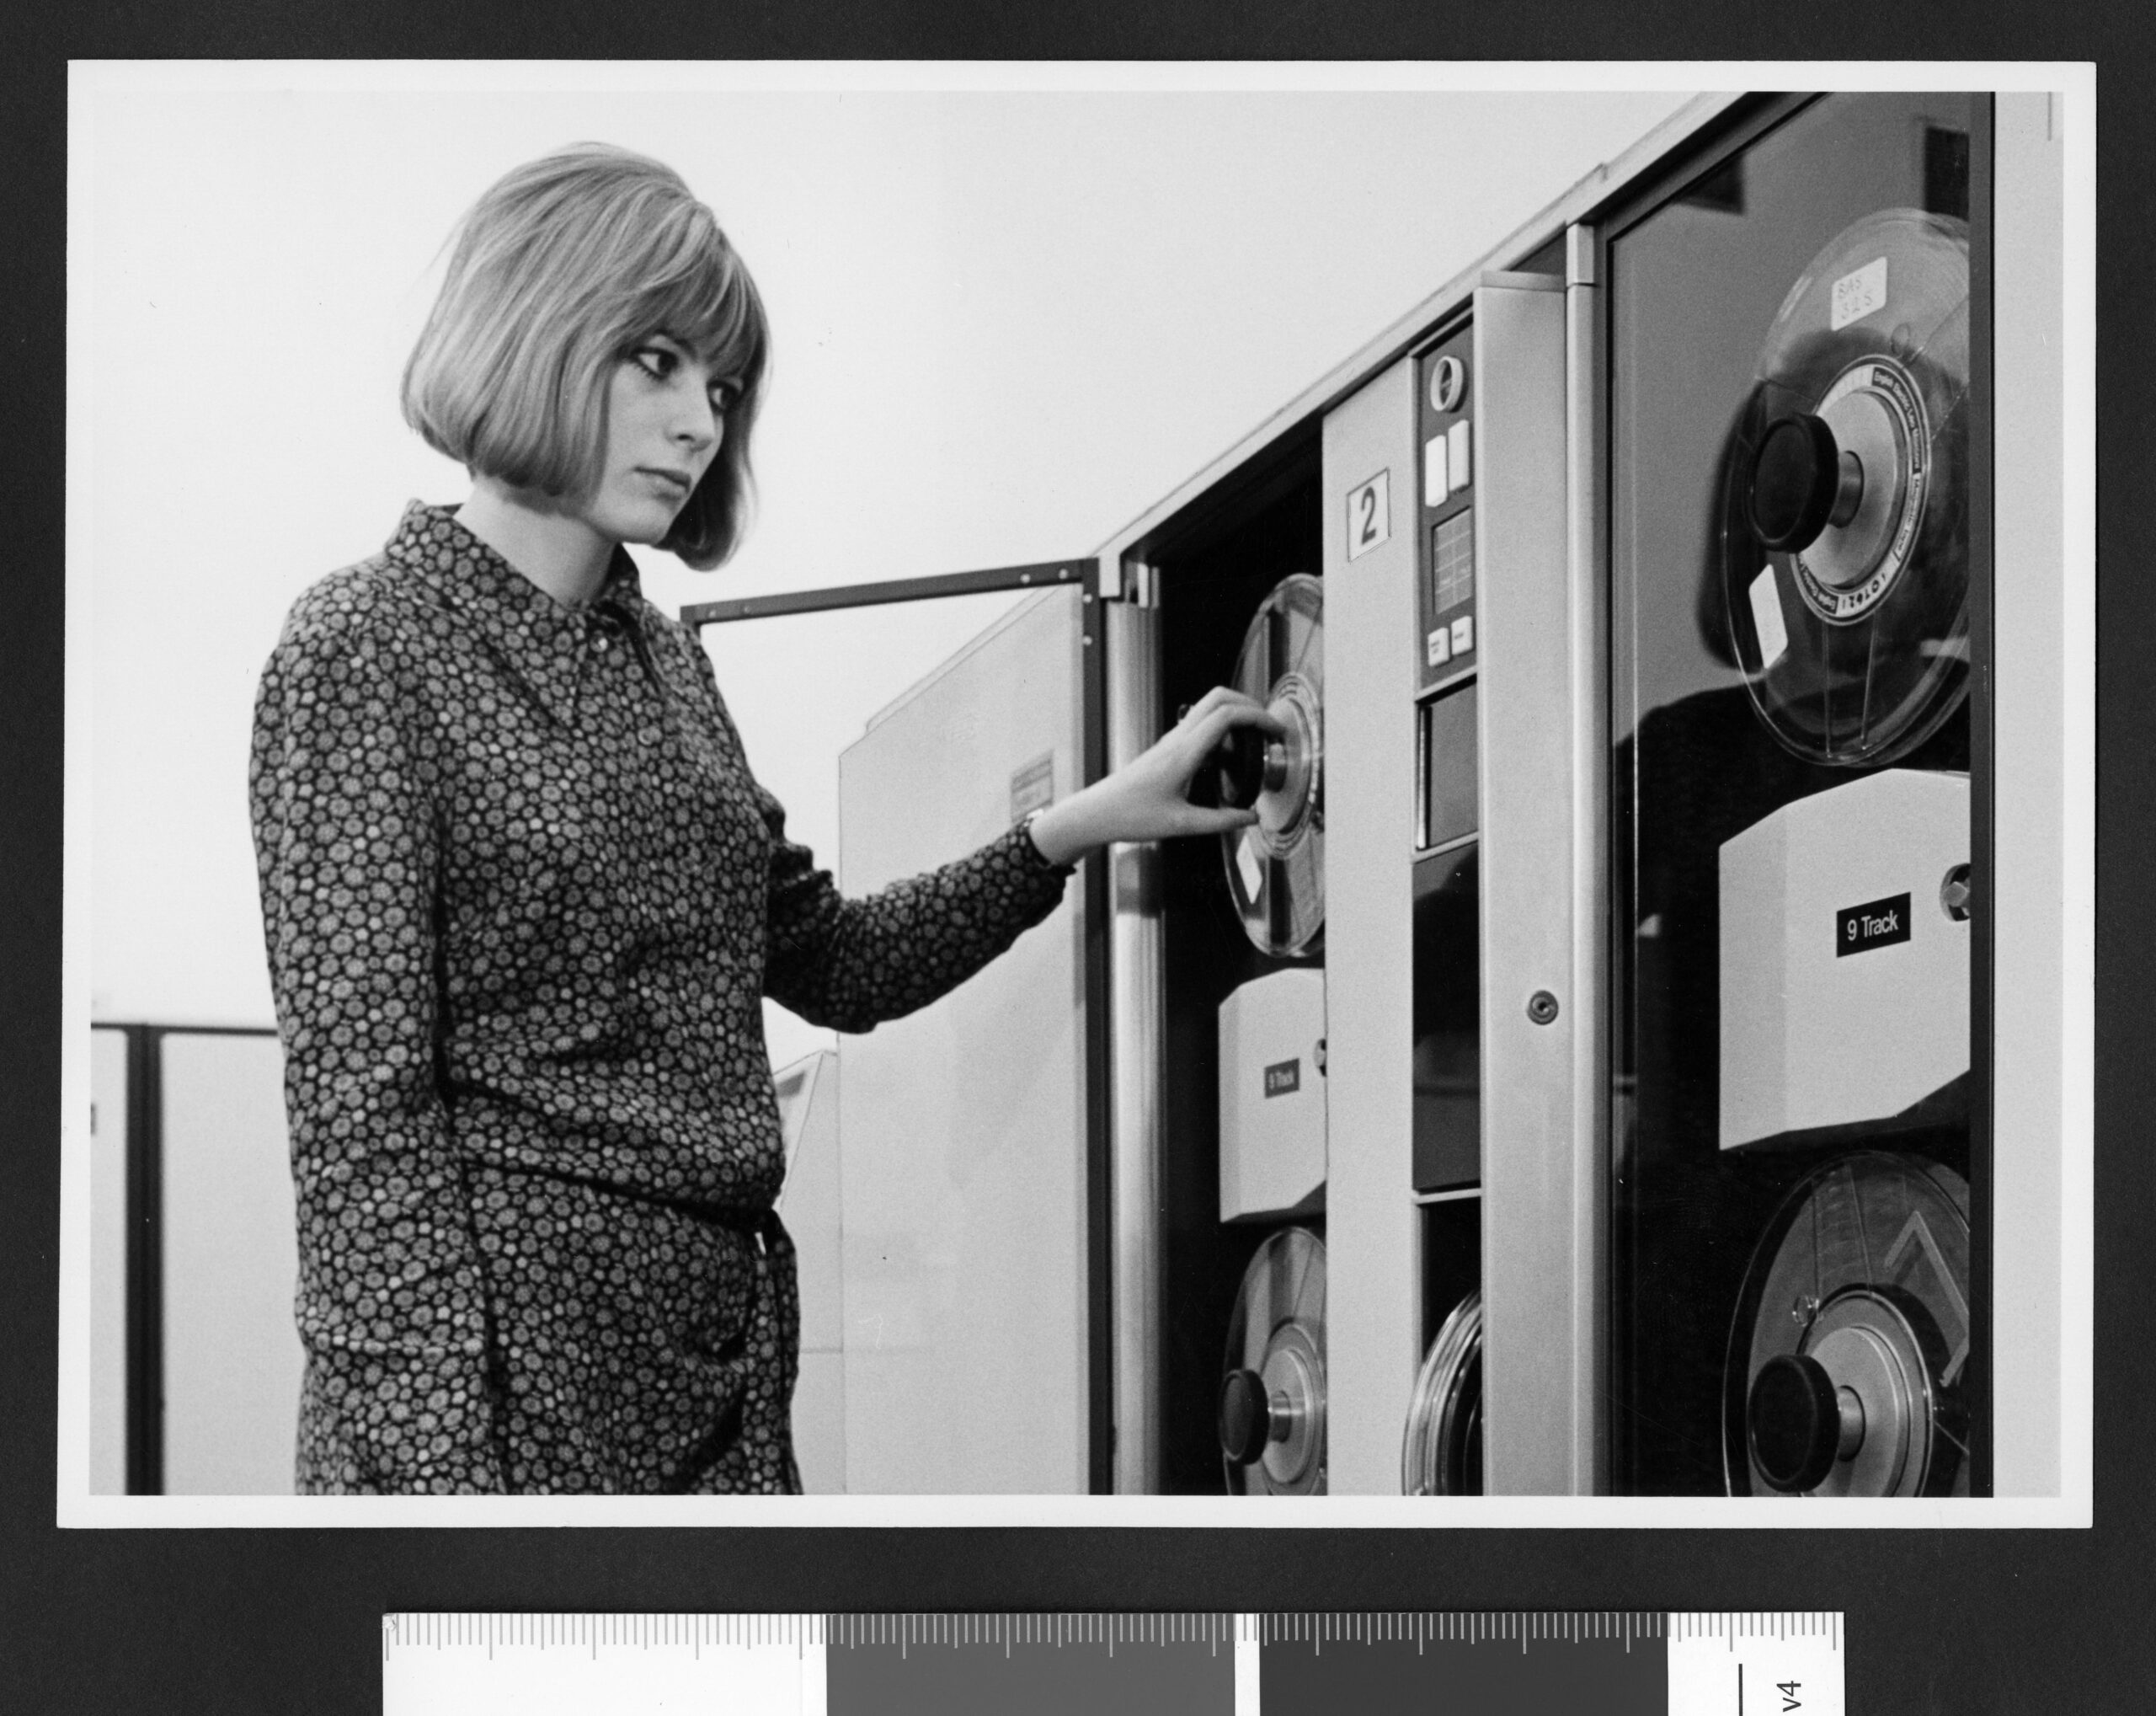 Using the ICL 4-50 computer, 1967-79